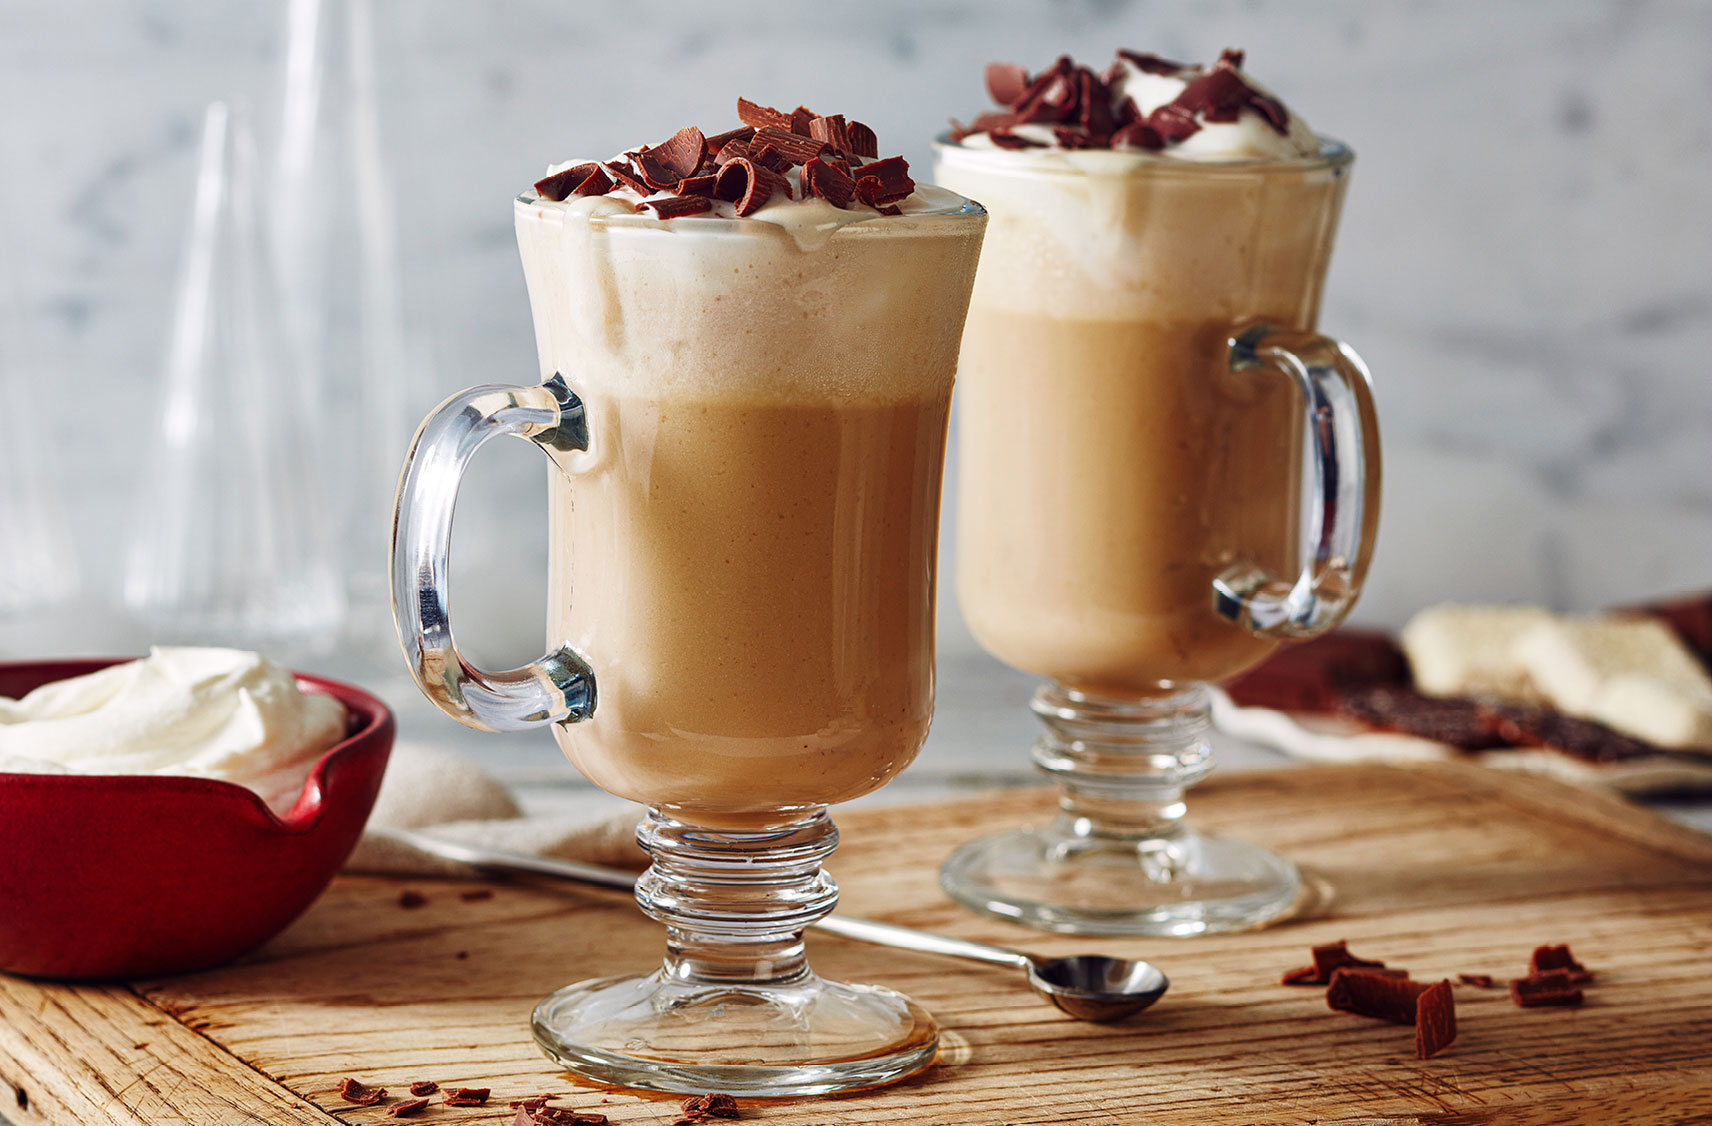 Two warm lattes topped with whipped creamed and chocolate shavings in glass mugs.	